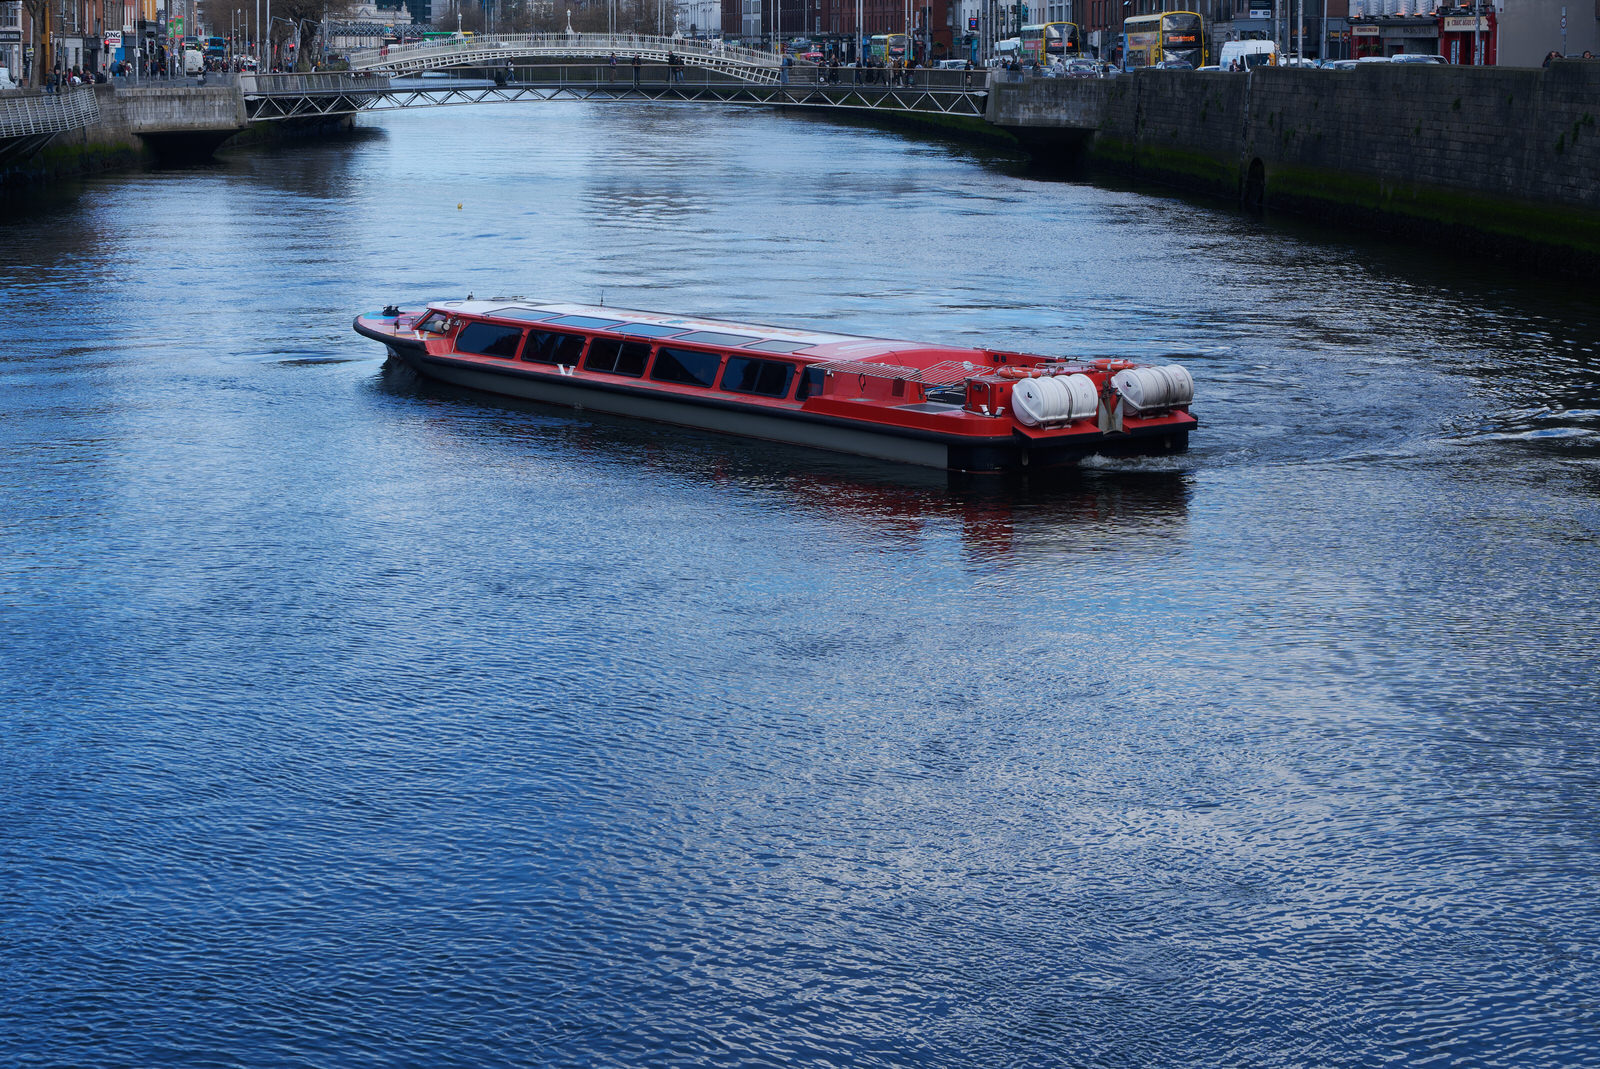 GLASS ROOFED TOUR BOAT ON THE RIVER LIFFEY